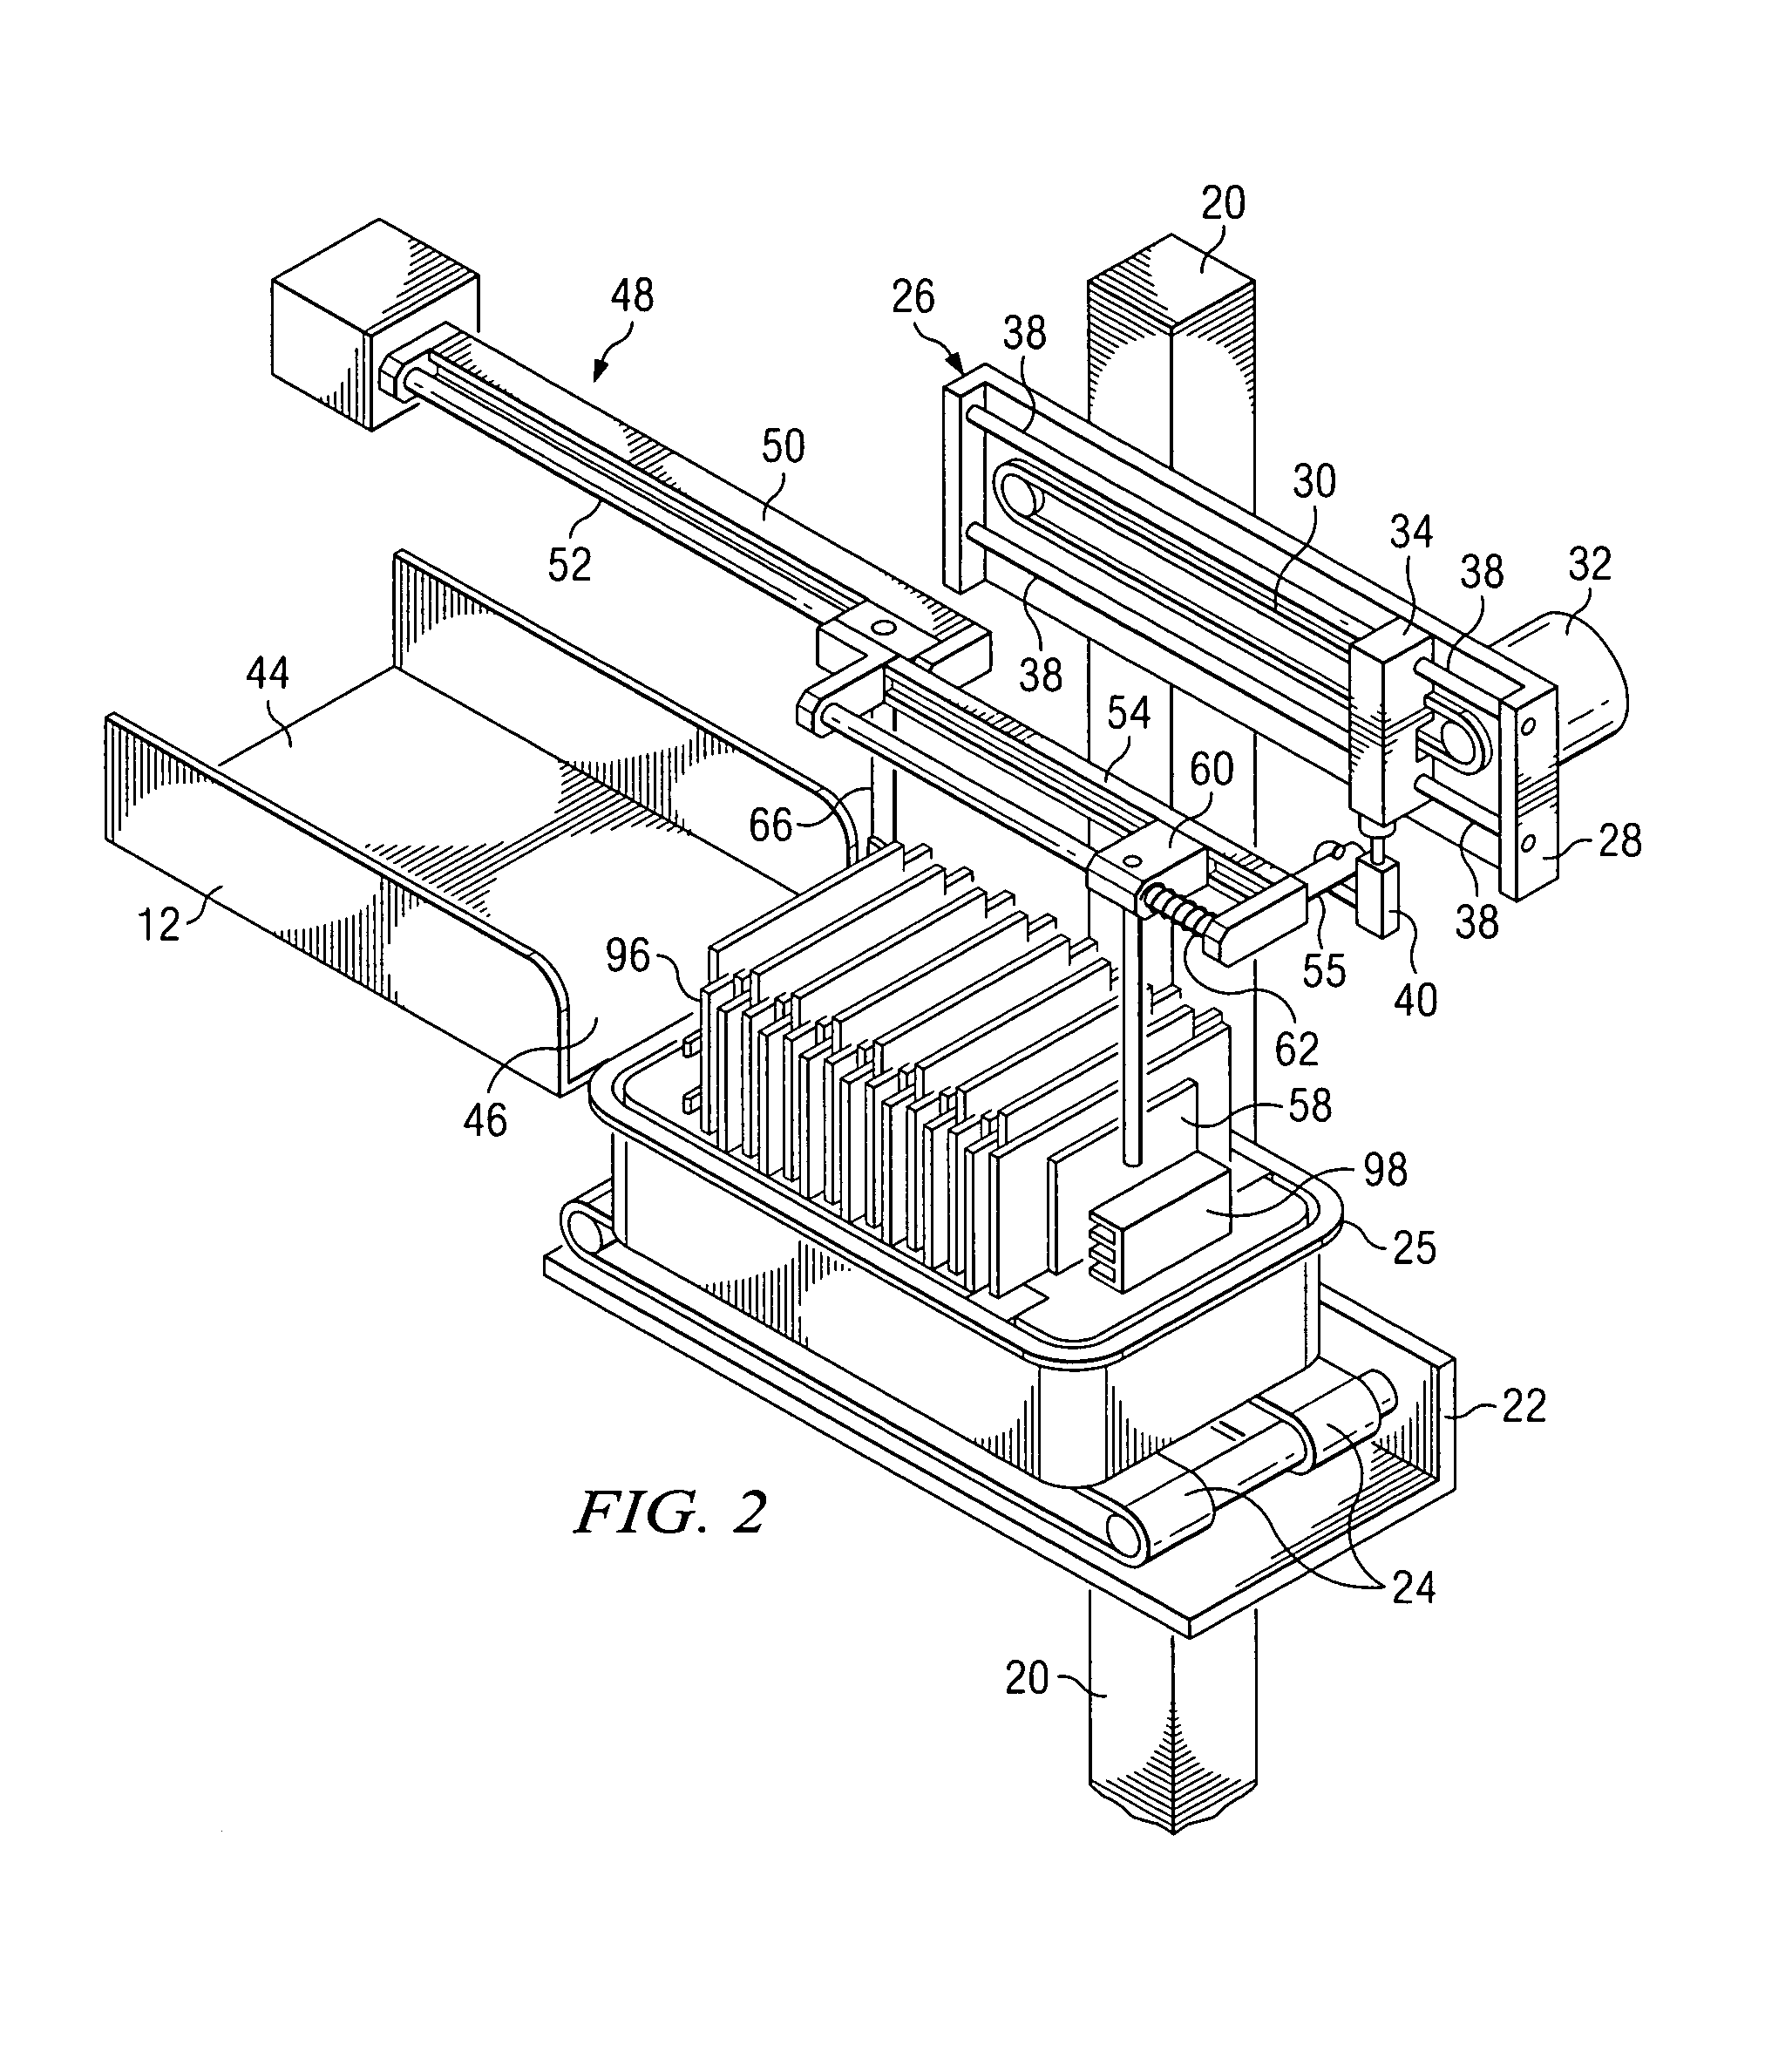 Method and apparatus for mechanized pocket sweeping